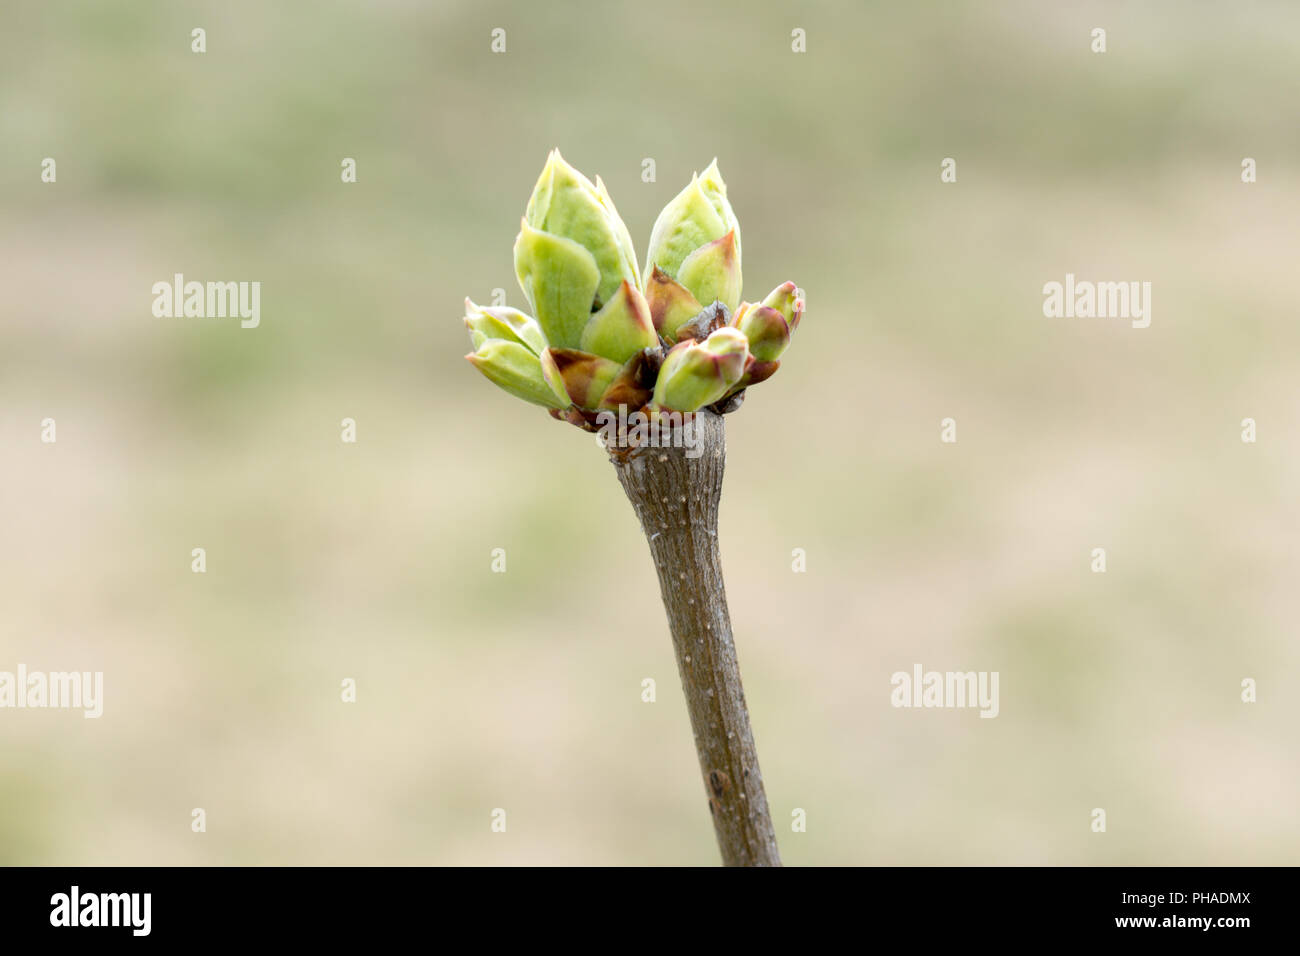 Chokeberry plant in early spring with unopened buds on twigs. Stock Photo